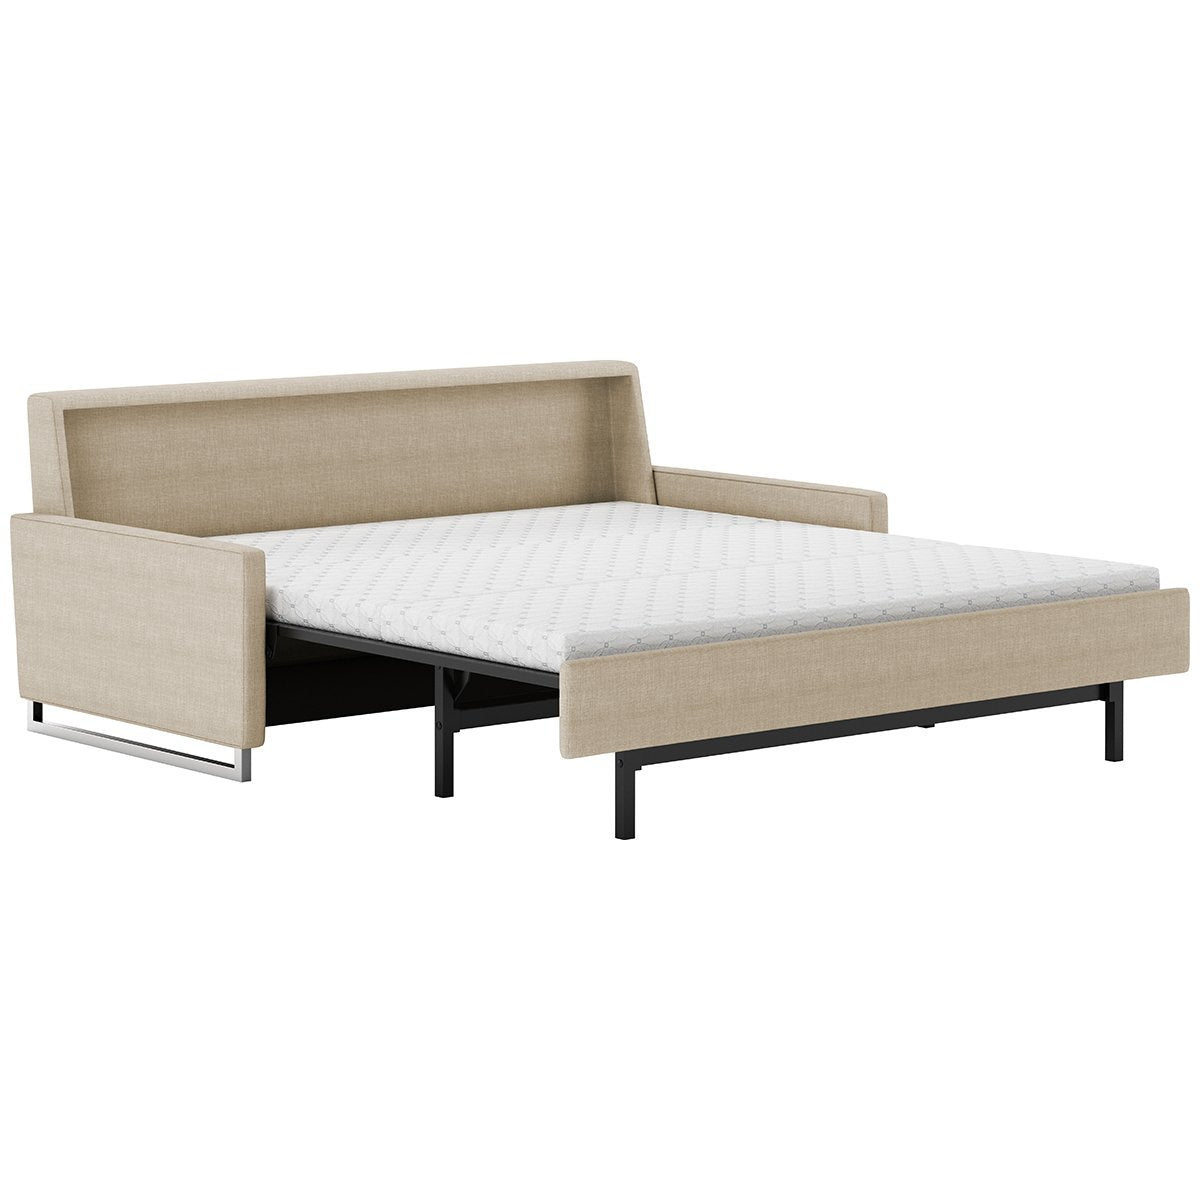 Brandt Upholstery Comfort Sleeper by American Leather